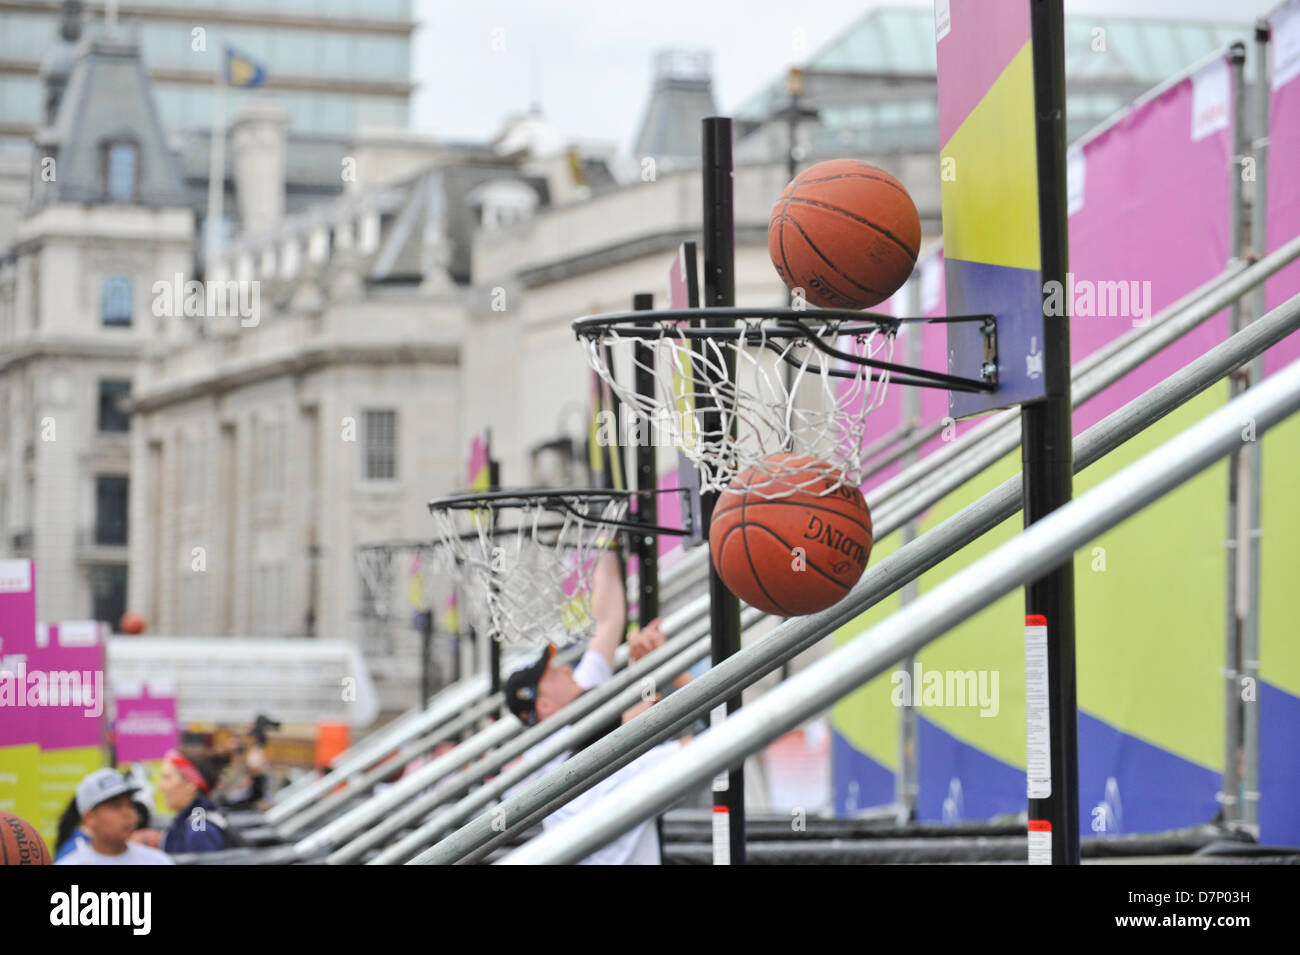 Trafalgar Square, London, UK. 11th May 2013. Basketball falling through the basket at the Fan Zone event in Trafalgar Square. The Turkish Airlines Euroleague Basketball Fan Zone fills more than 2,000 square meters of Trafalgar Square with activities throughout Final Four weekend from Friday, May 10 to Sunday, May 12. A weather-proof Main Court, two full courts complete with a 15-meter-high roof, in the middle of the square. The Turkish Airlines Main Court will be the main venue for games, contests and other activities. Credit:Matthew Chattle/Alamy Stock Photo